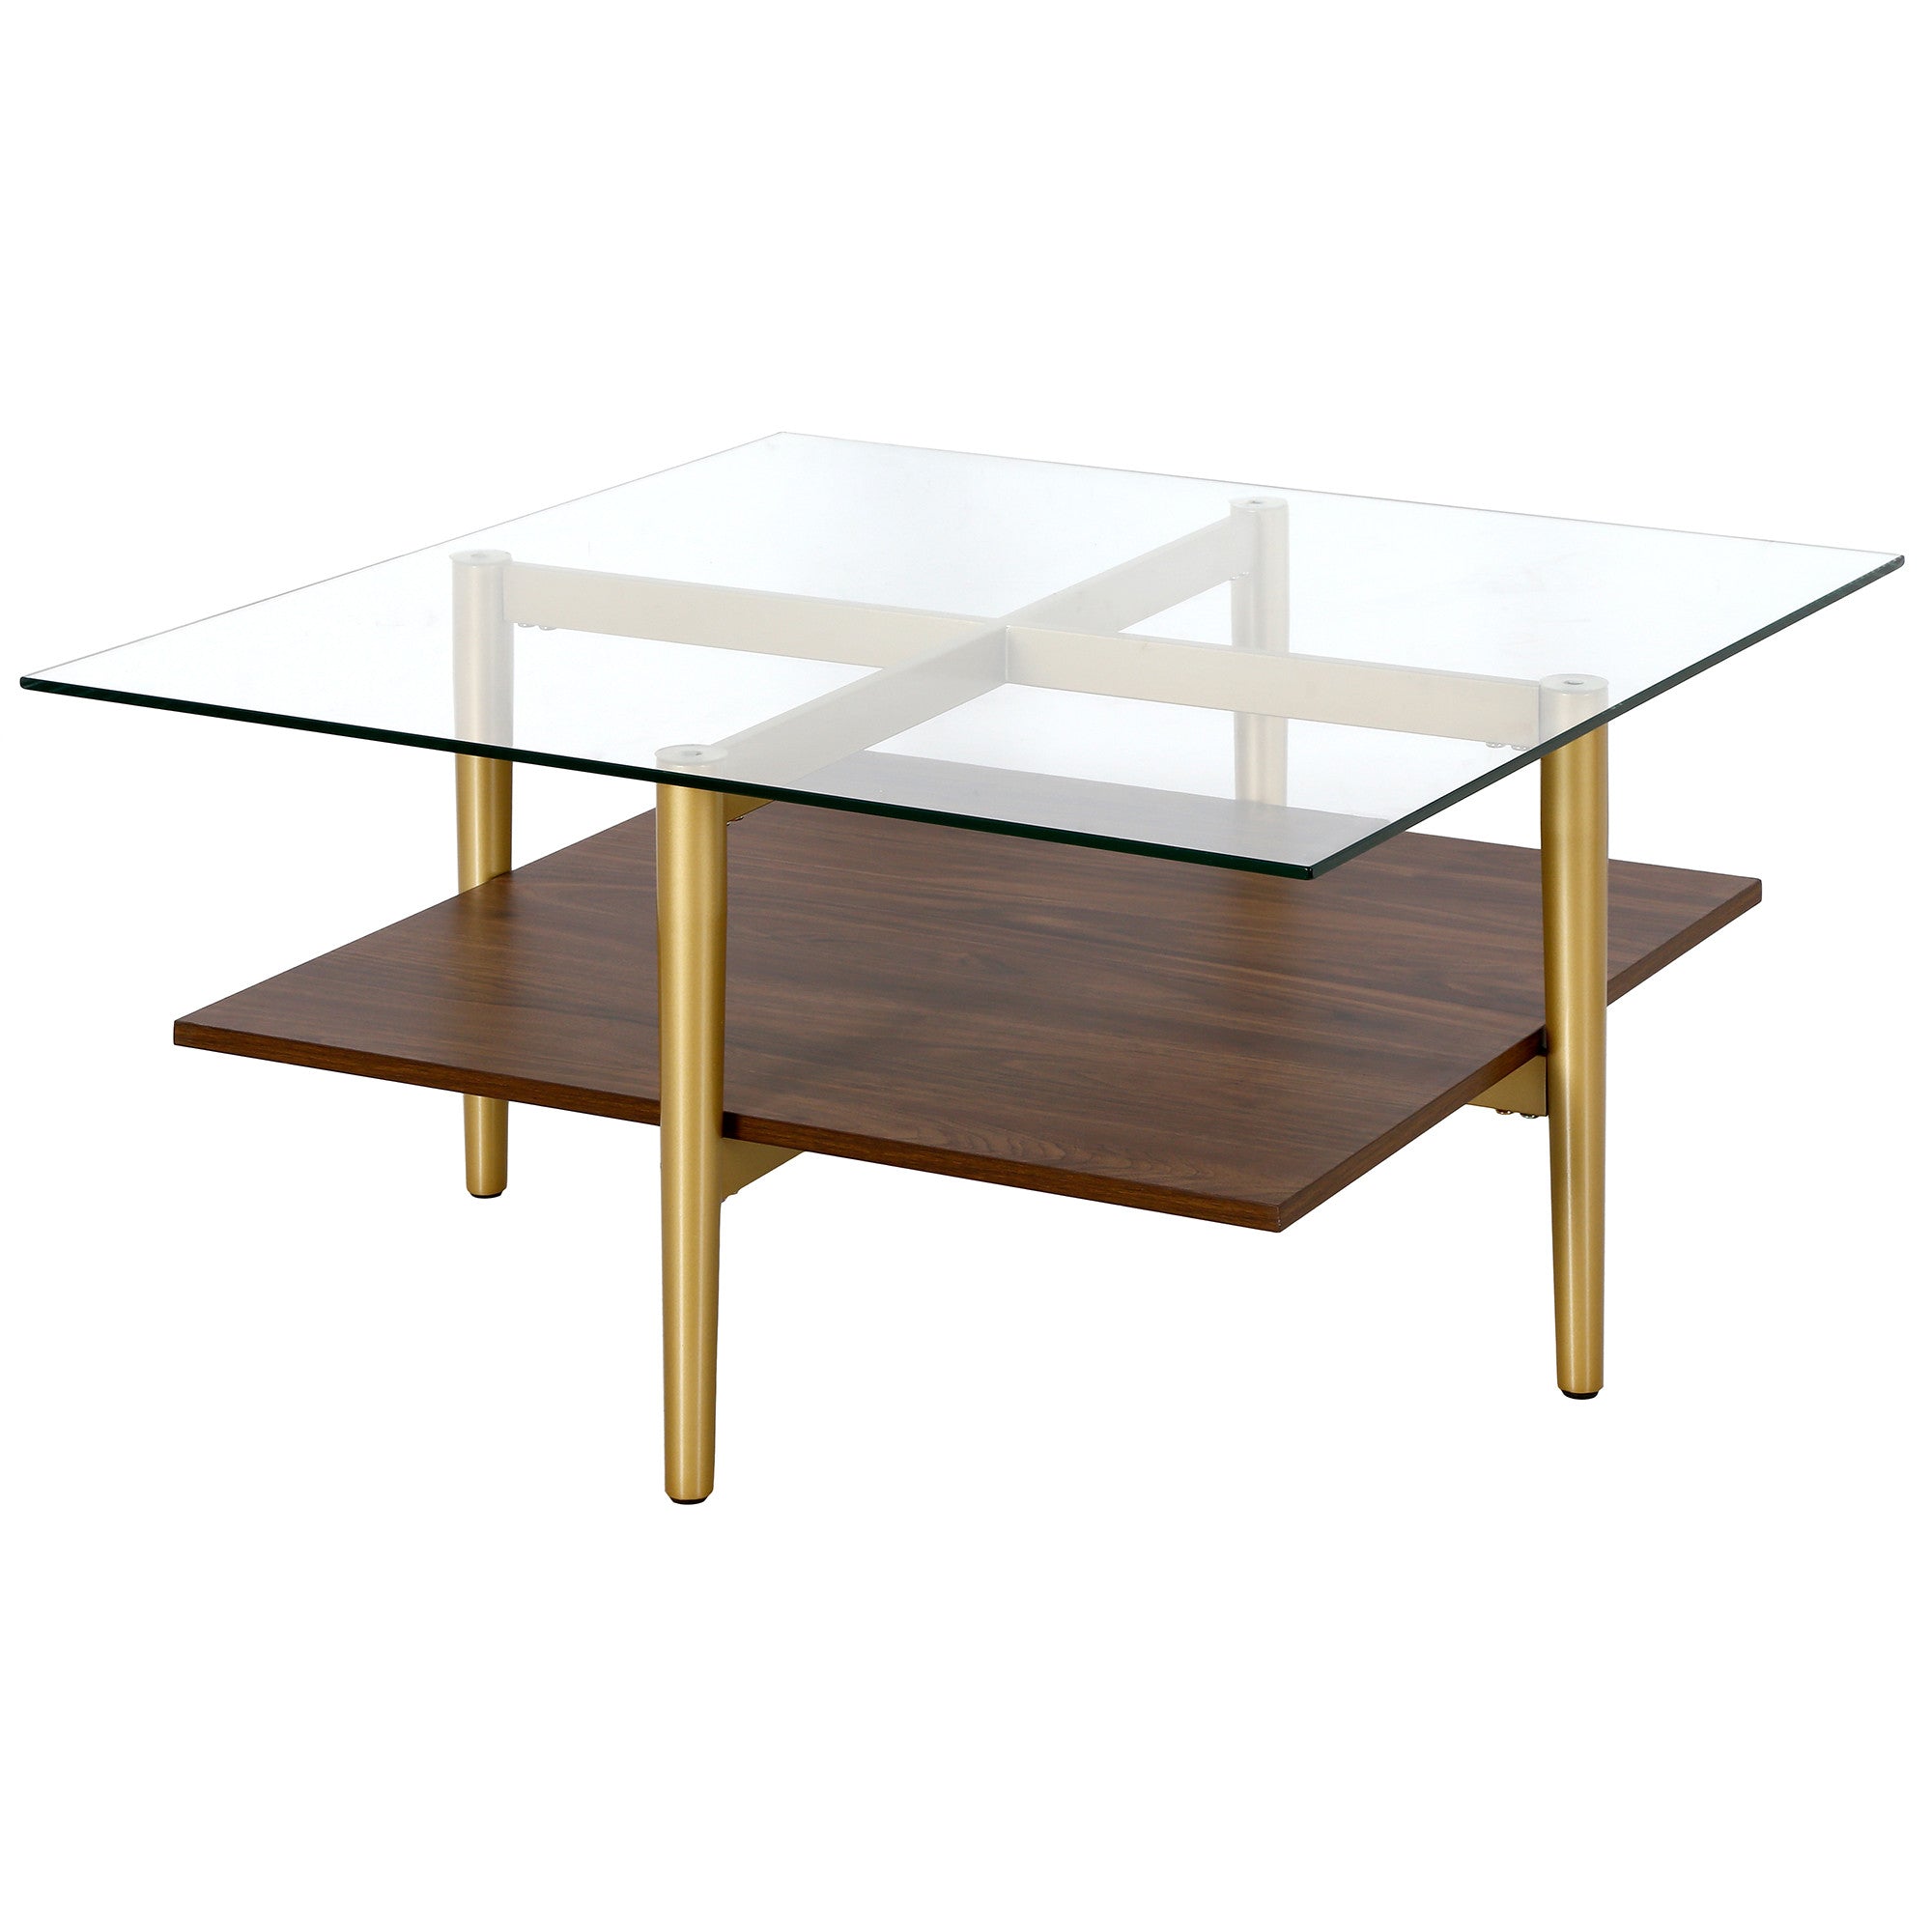 32" Brown And Gold Glass And Steel Square Coffee Table With Shelf